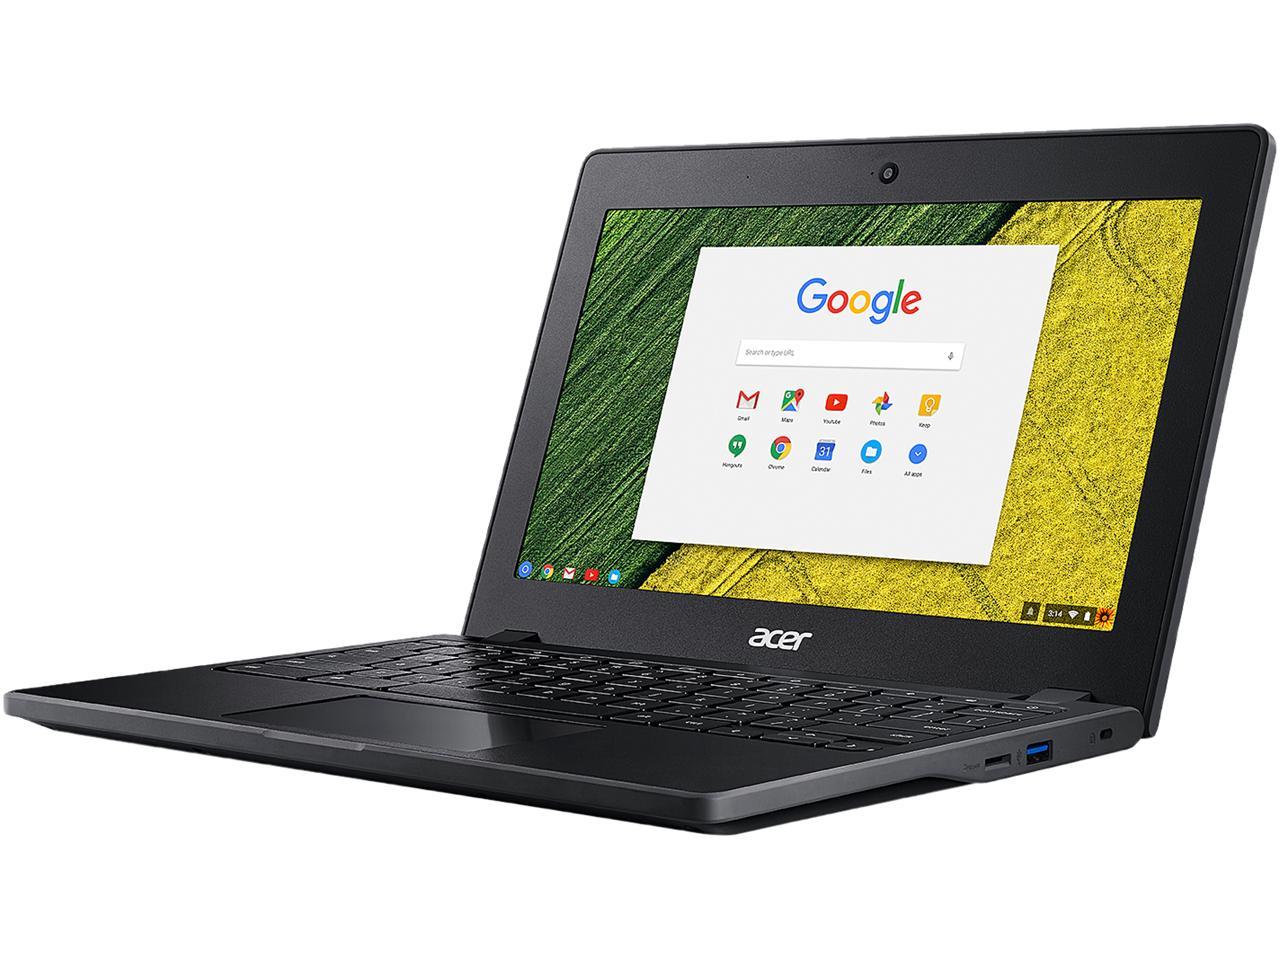 Acer C771T-C1WS 11.6" Touchscreen LCD Chromebook - Intel Celeron 3855U Dual-core (2 Core) 1.60 GHz - 4 GB LPDDR3 - 32 GB Flash Memory - Chrome OS - 1366 x 768 - In-plane Switching (IPS) Technology